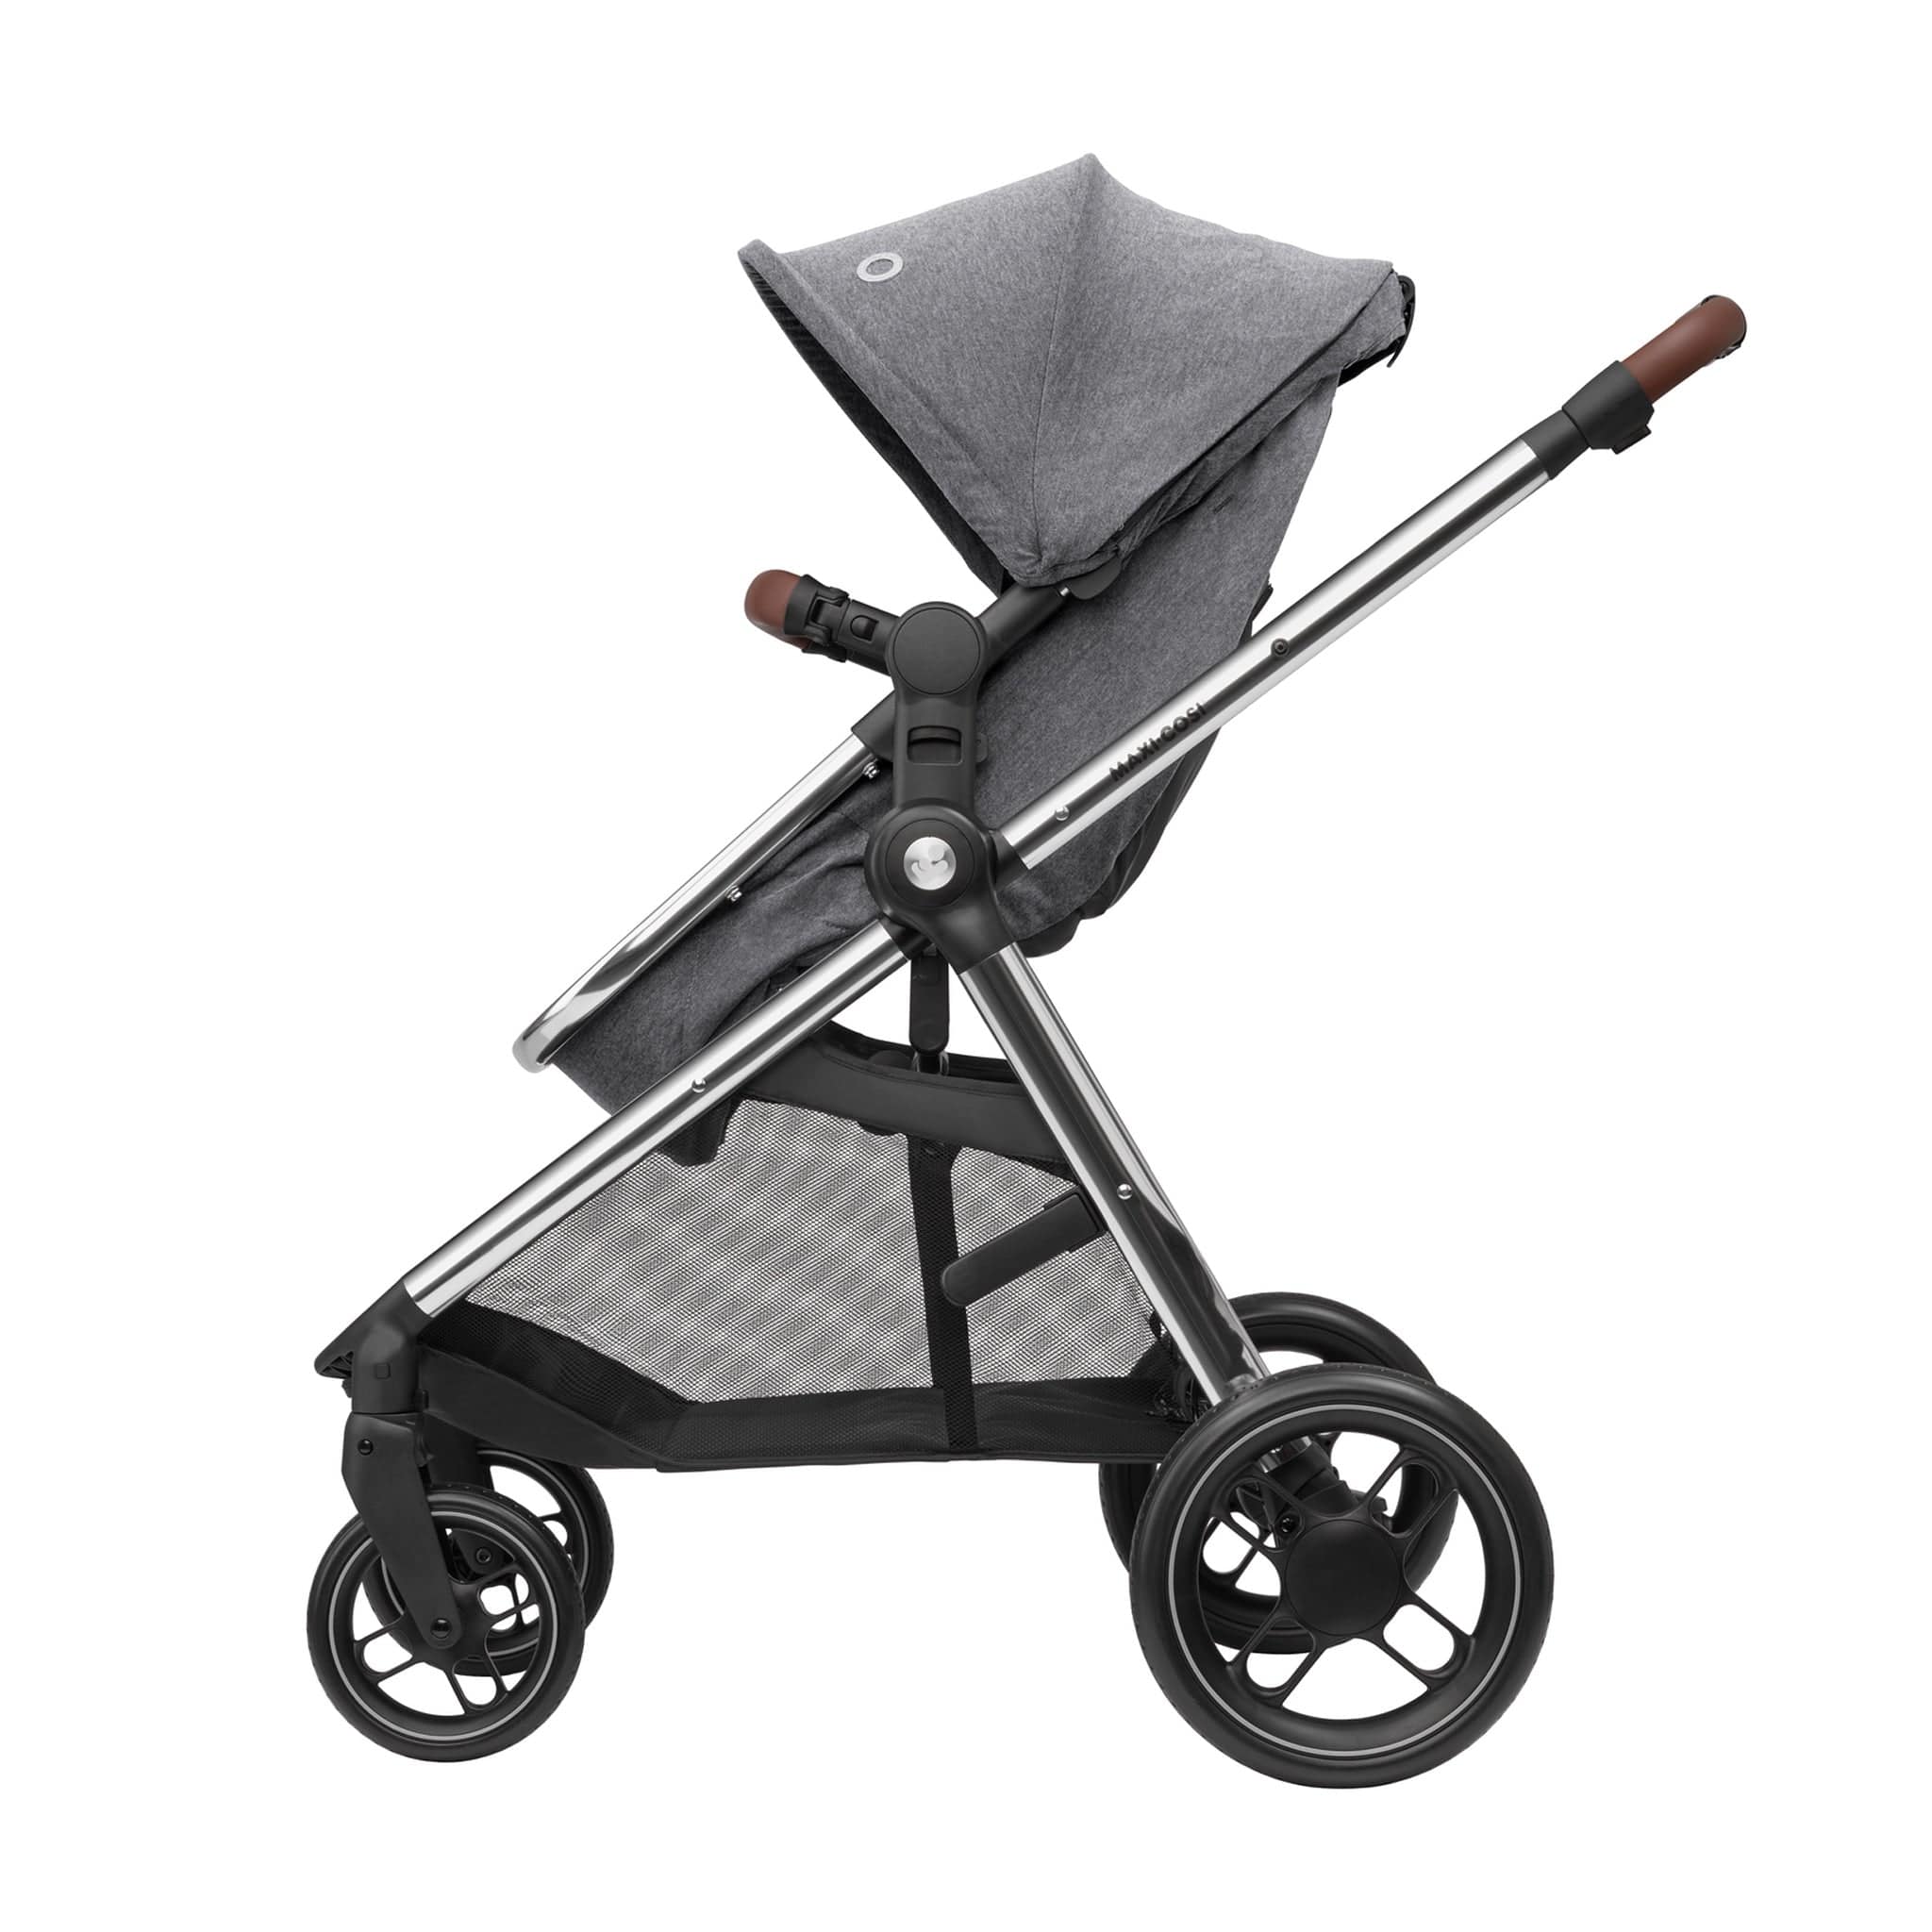 Maxi-Cosi travel systems Maxi-Cosi Zelia Luxe with Cabriofix i-Size & Base Travel System in Twillic Grey 11072-TWI-GRY